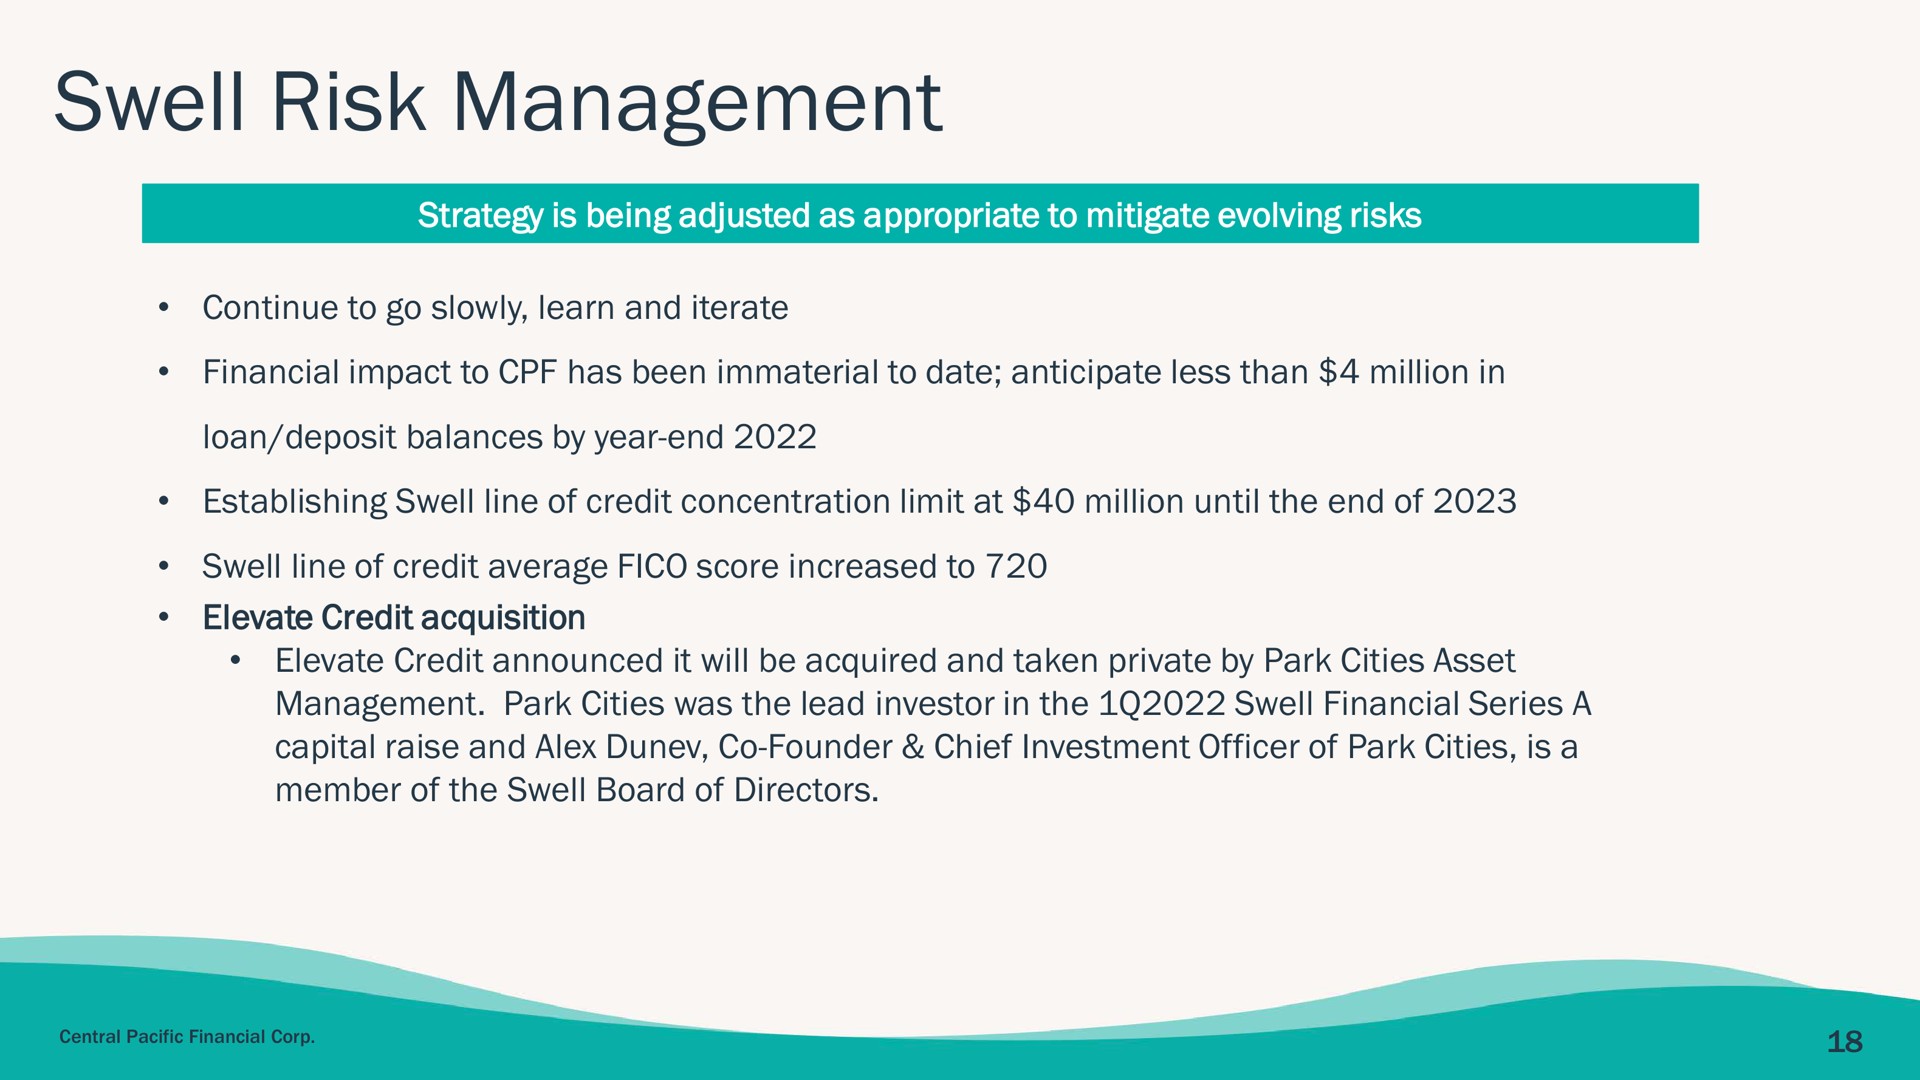 swell risk management | Central Pacific Financial